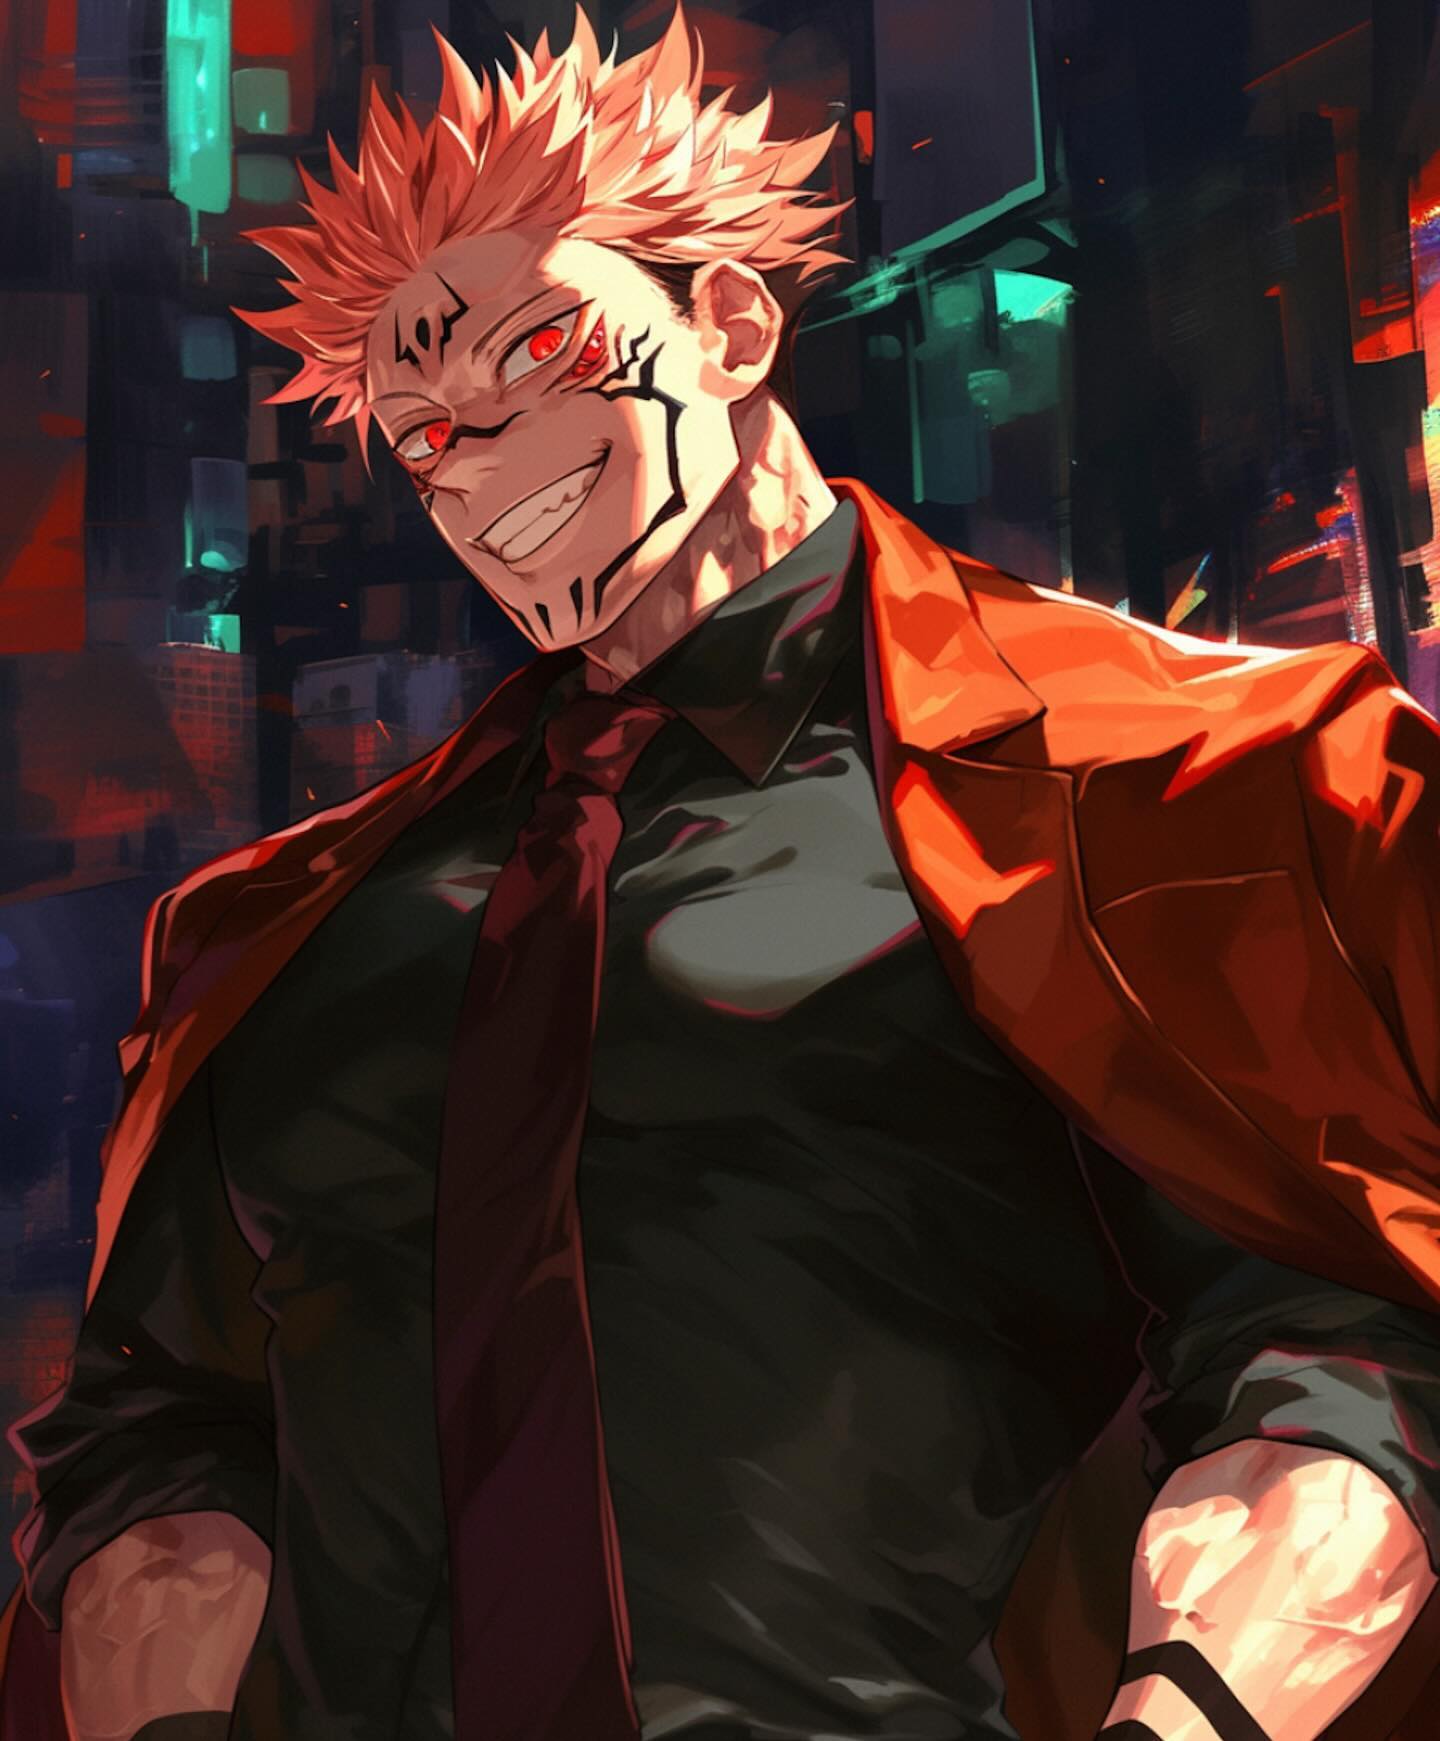 Ryomen Sukuna from Jujutsu Kaisen Does he look Good with a suit?-435712766_632474979062845_458297305335593263_n 